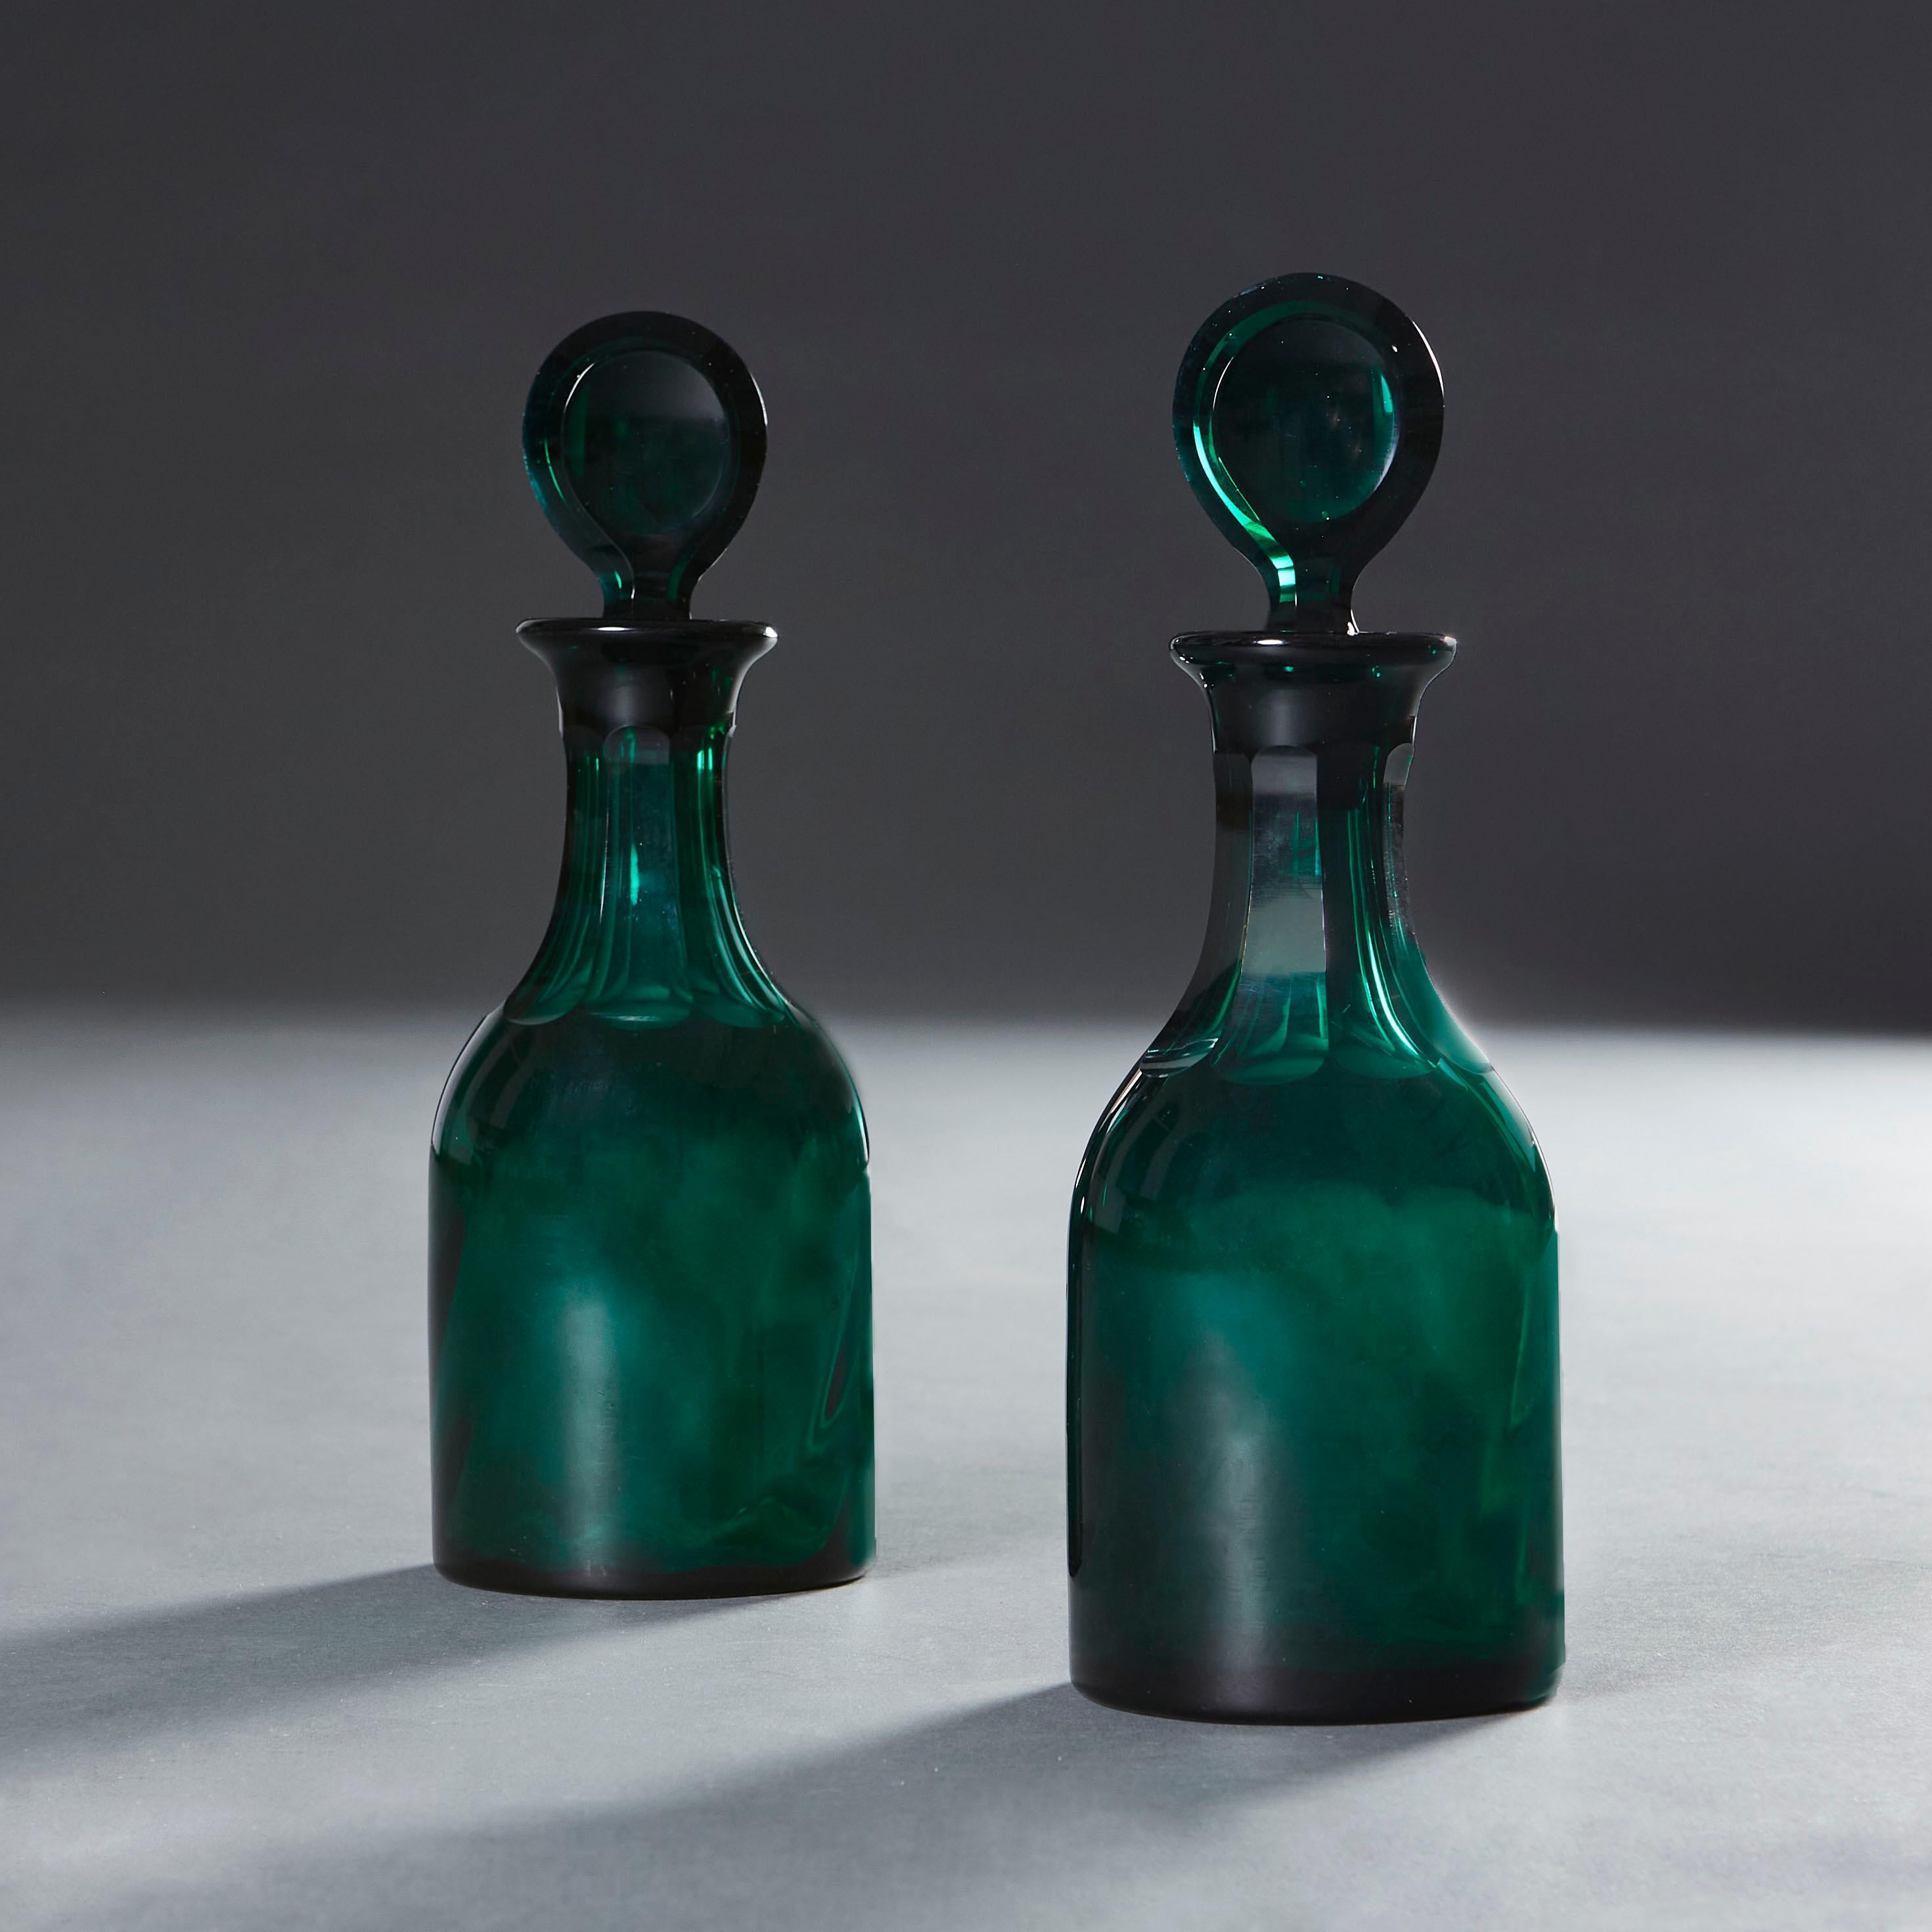 English Pair of 19th Century Bristol Green Glass Decanters For Sale